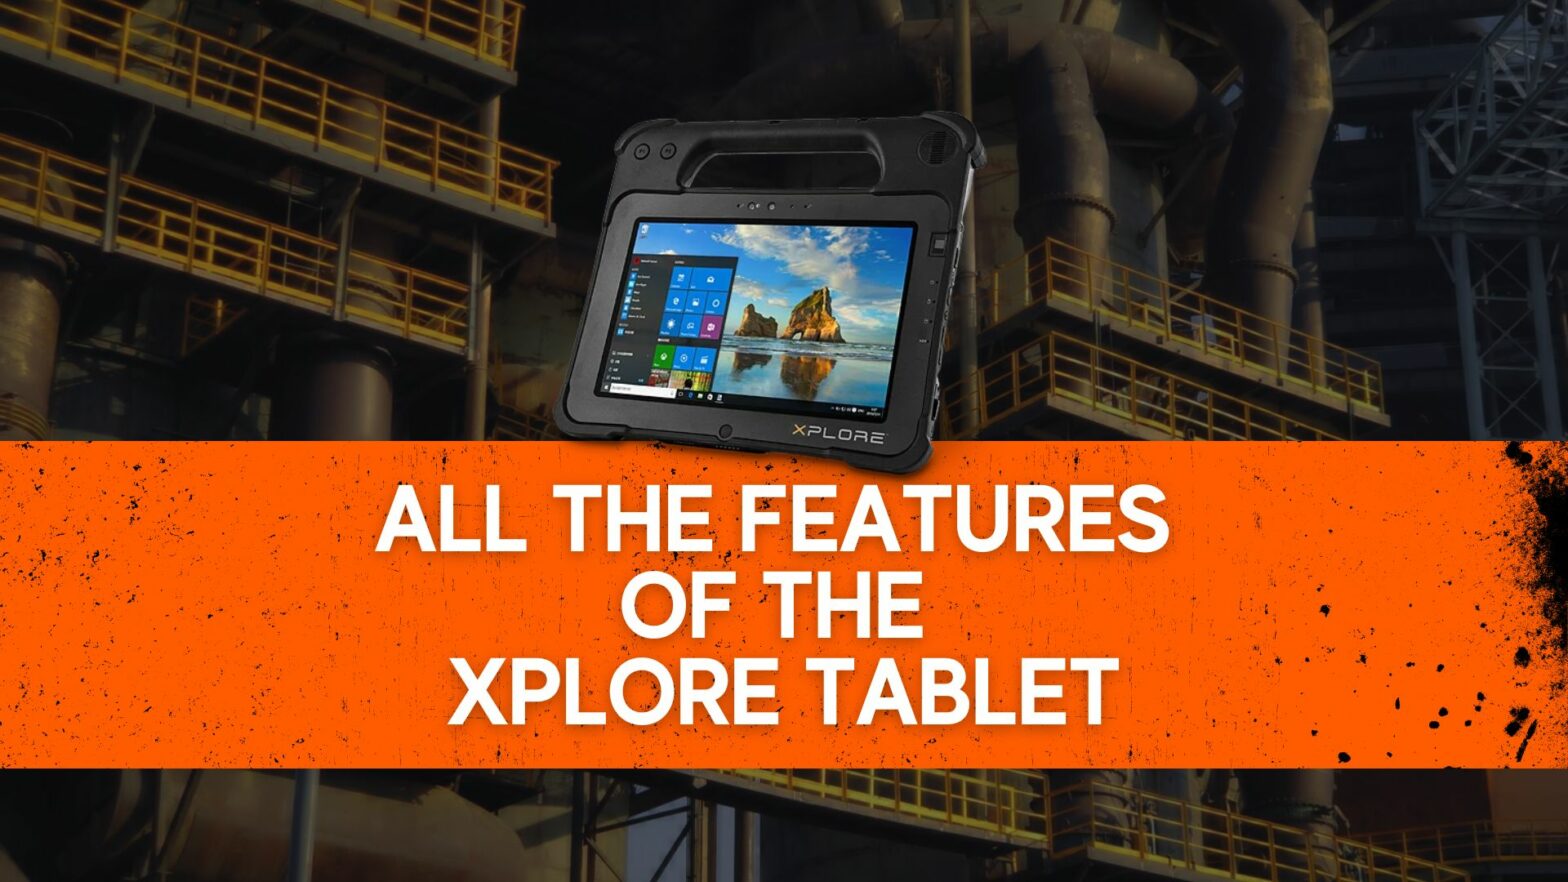 All the features of the Xplore Tablet